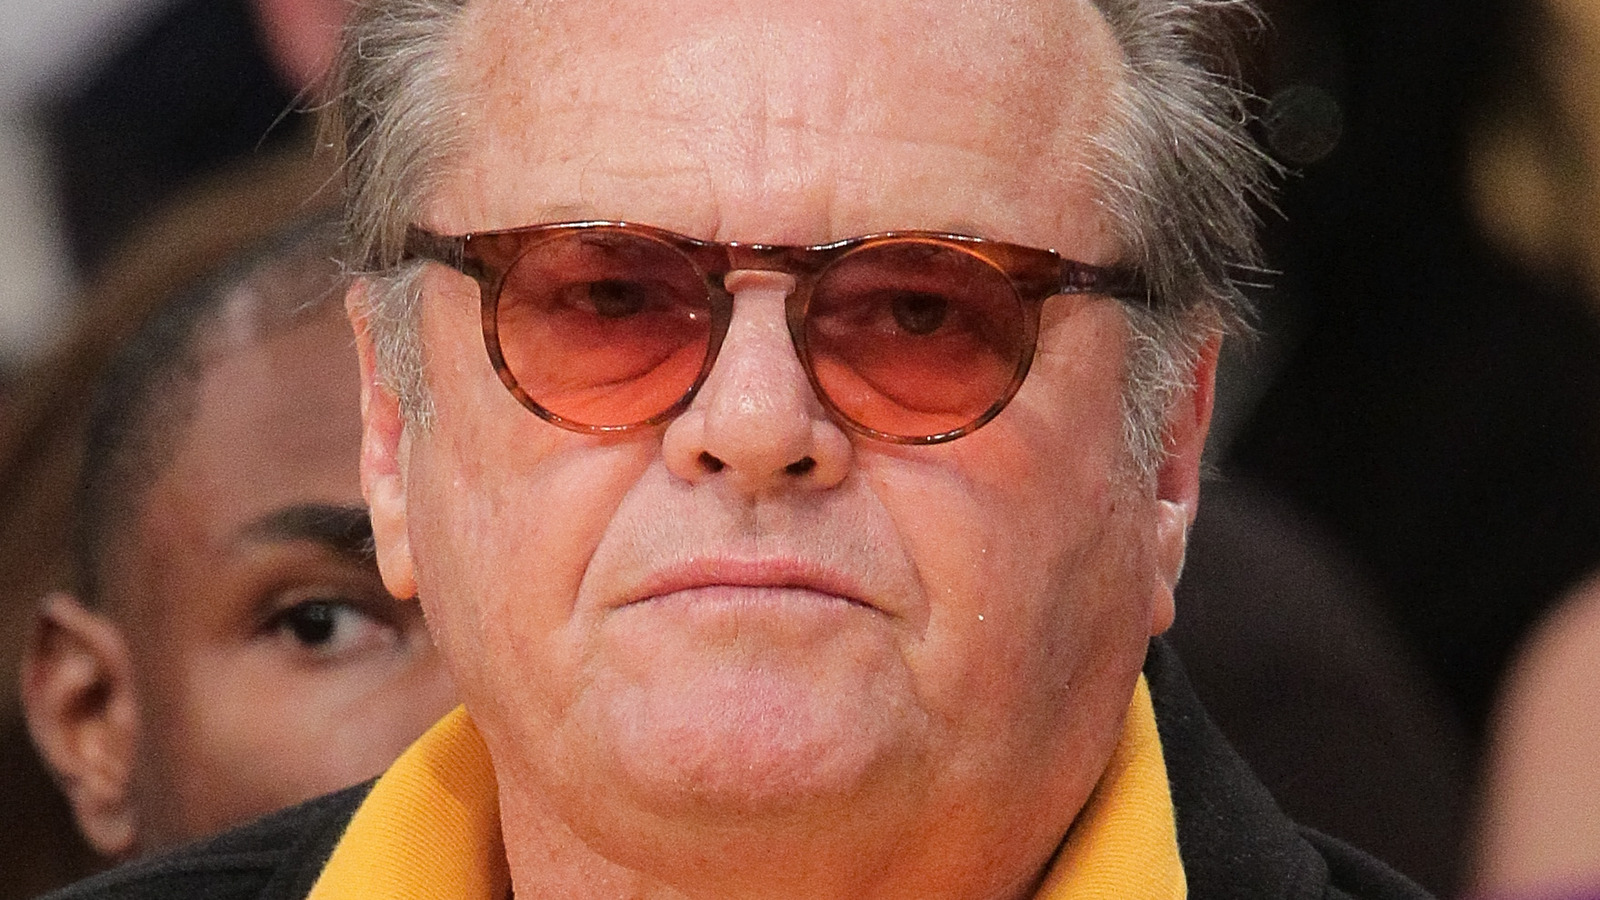 The Truth About Jack Nicholson's Relationship With Anjelica Huston